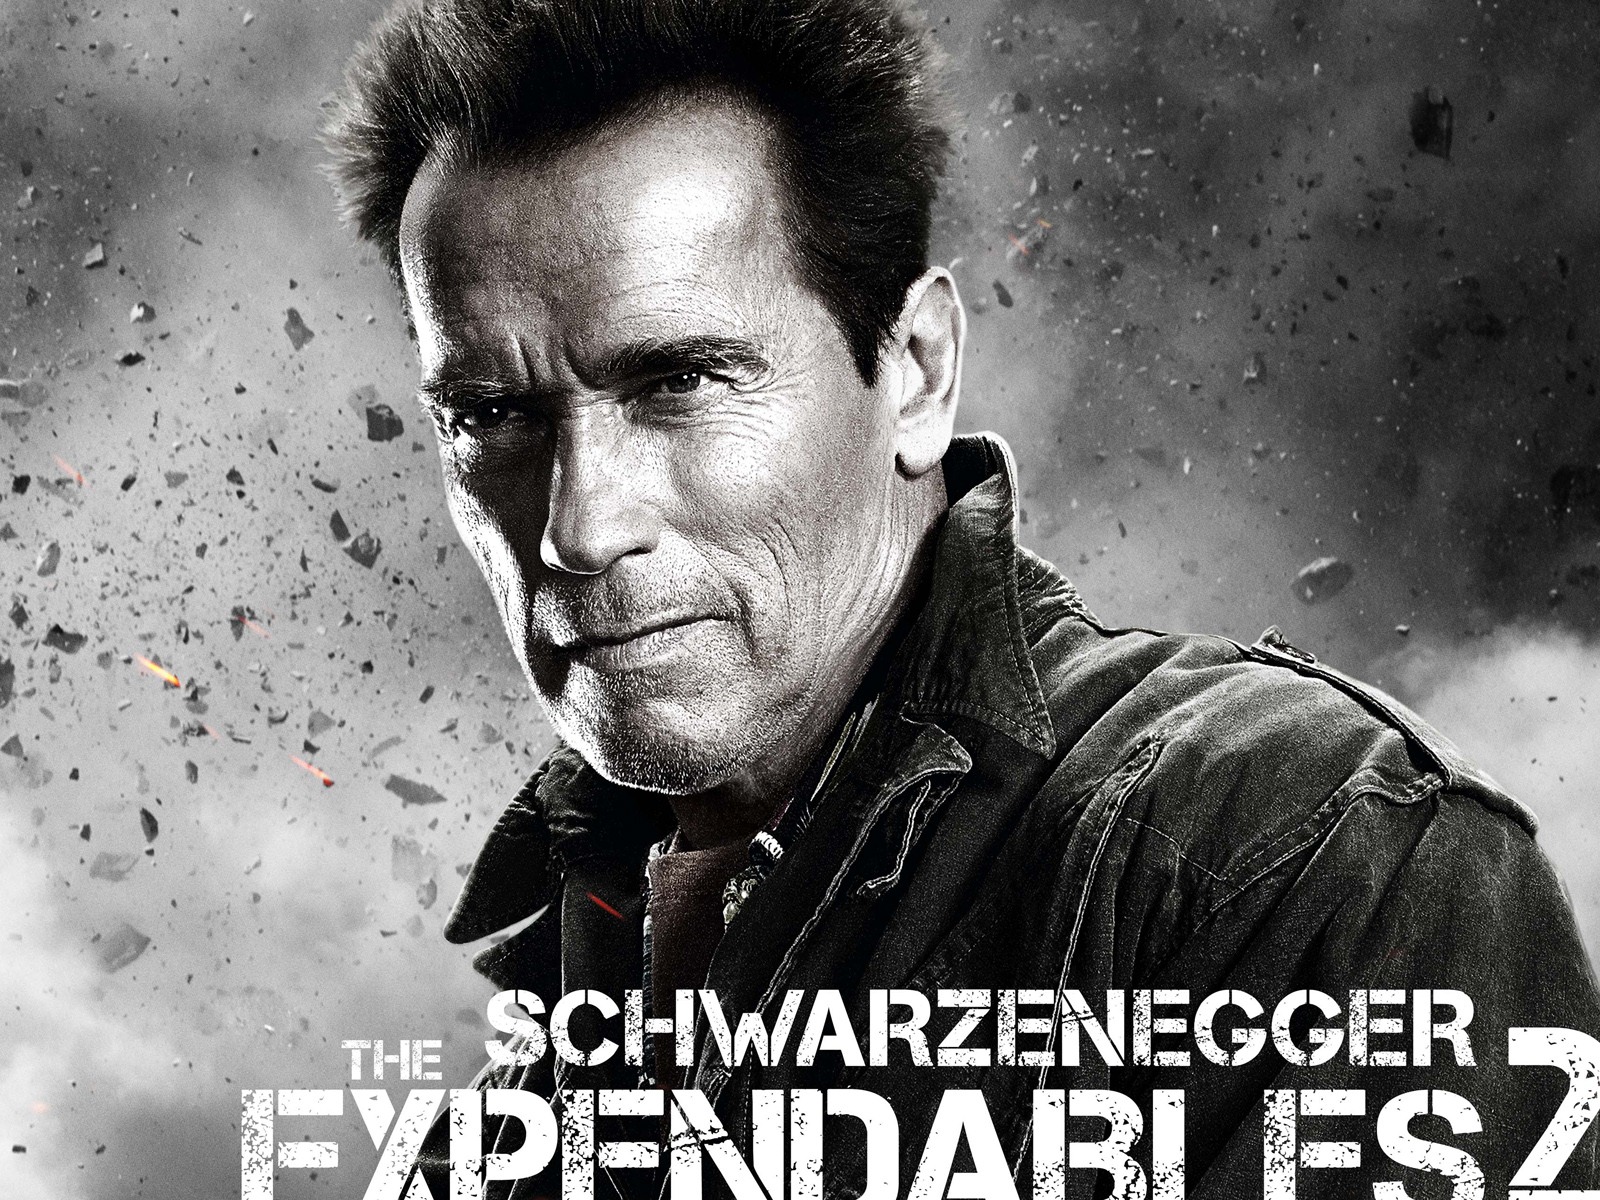 2012 The Expendables 2 敢死队2 高清壁纸4 - 1600x1200